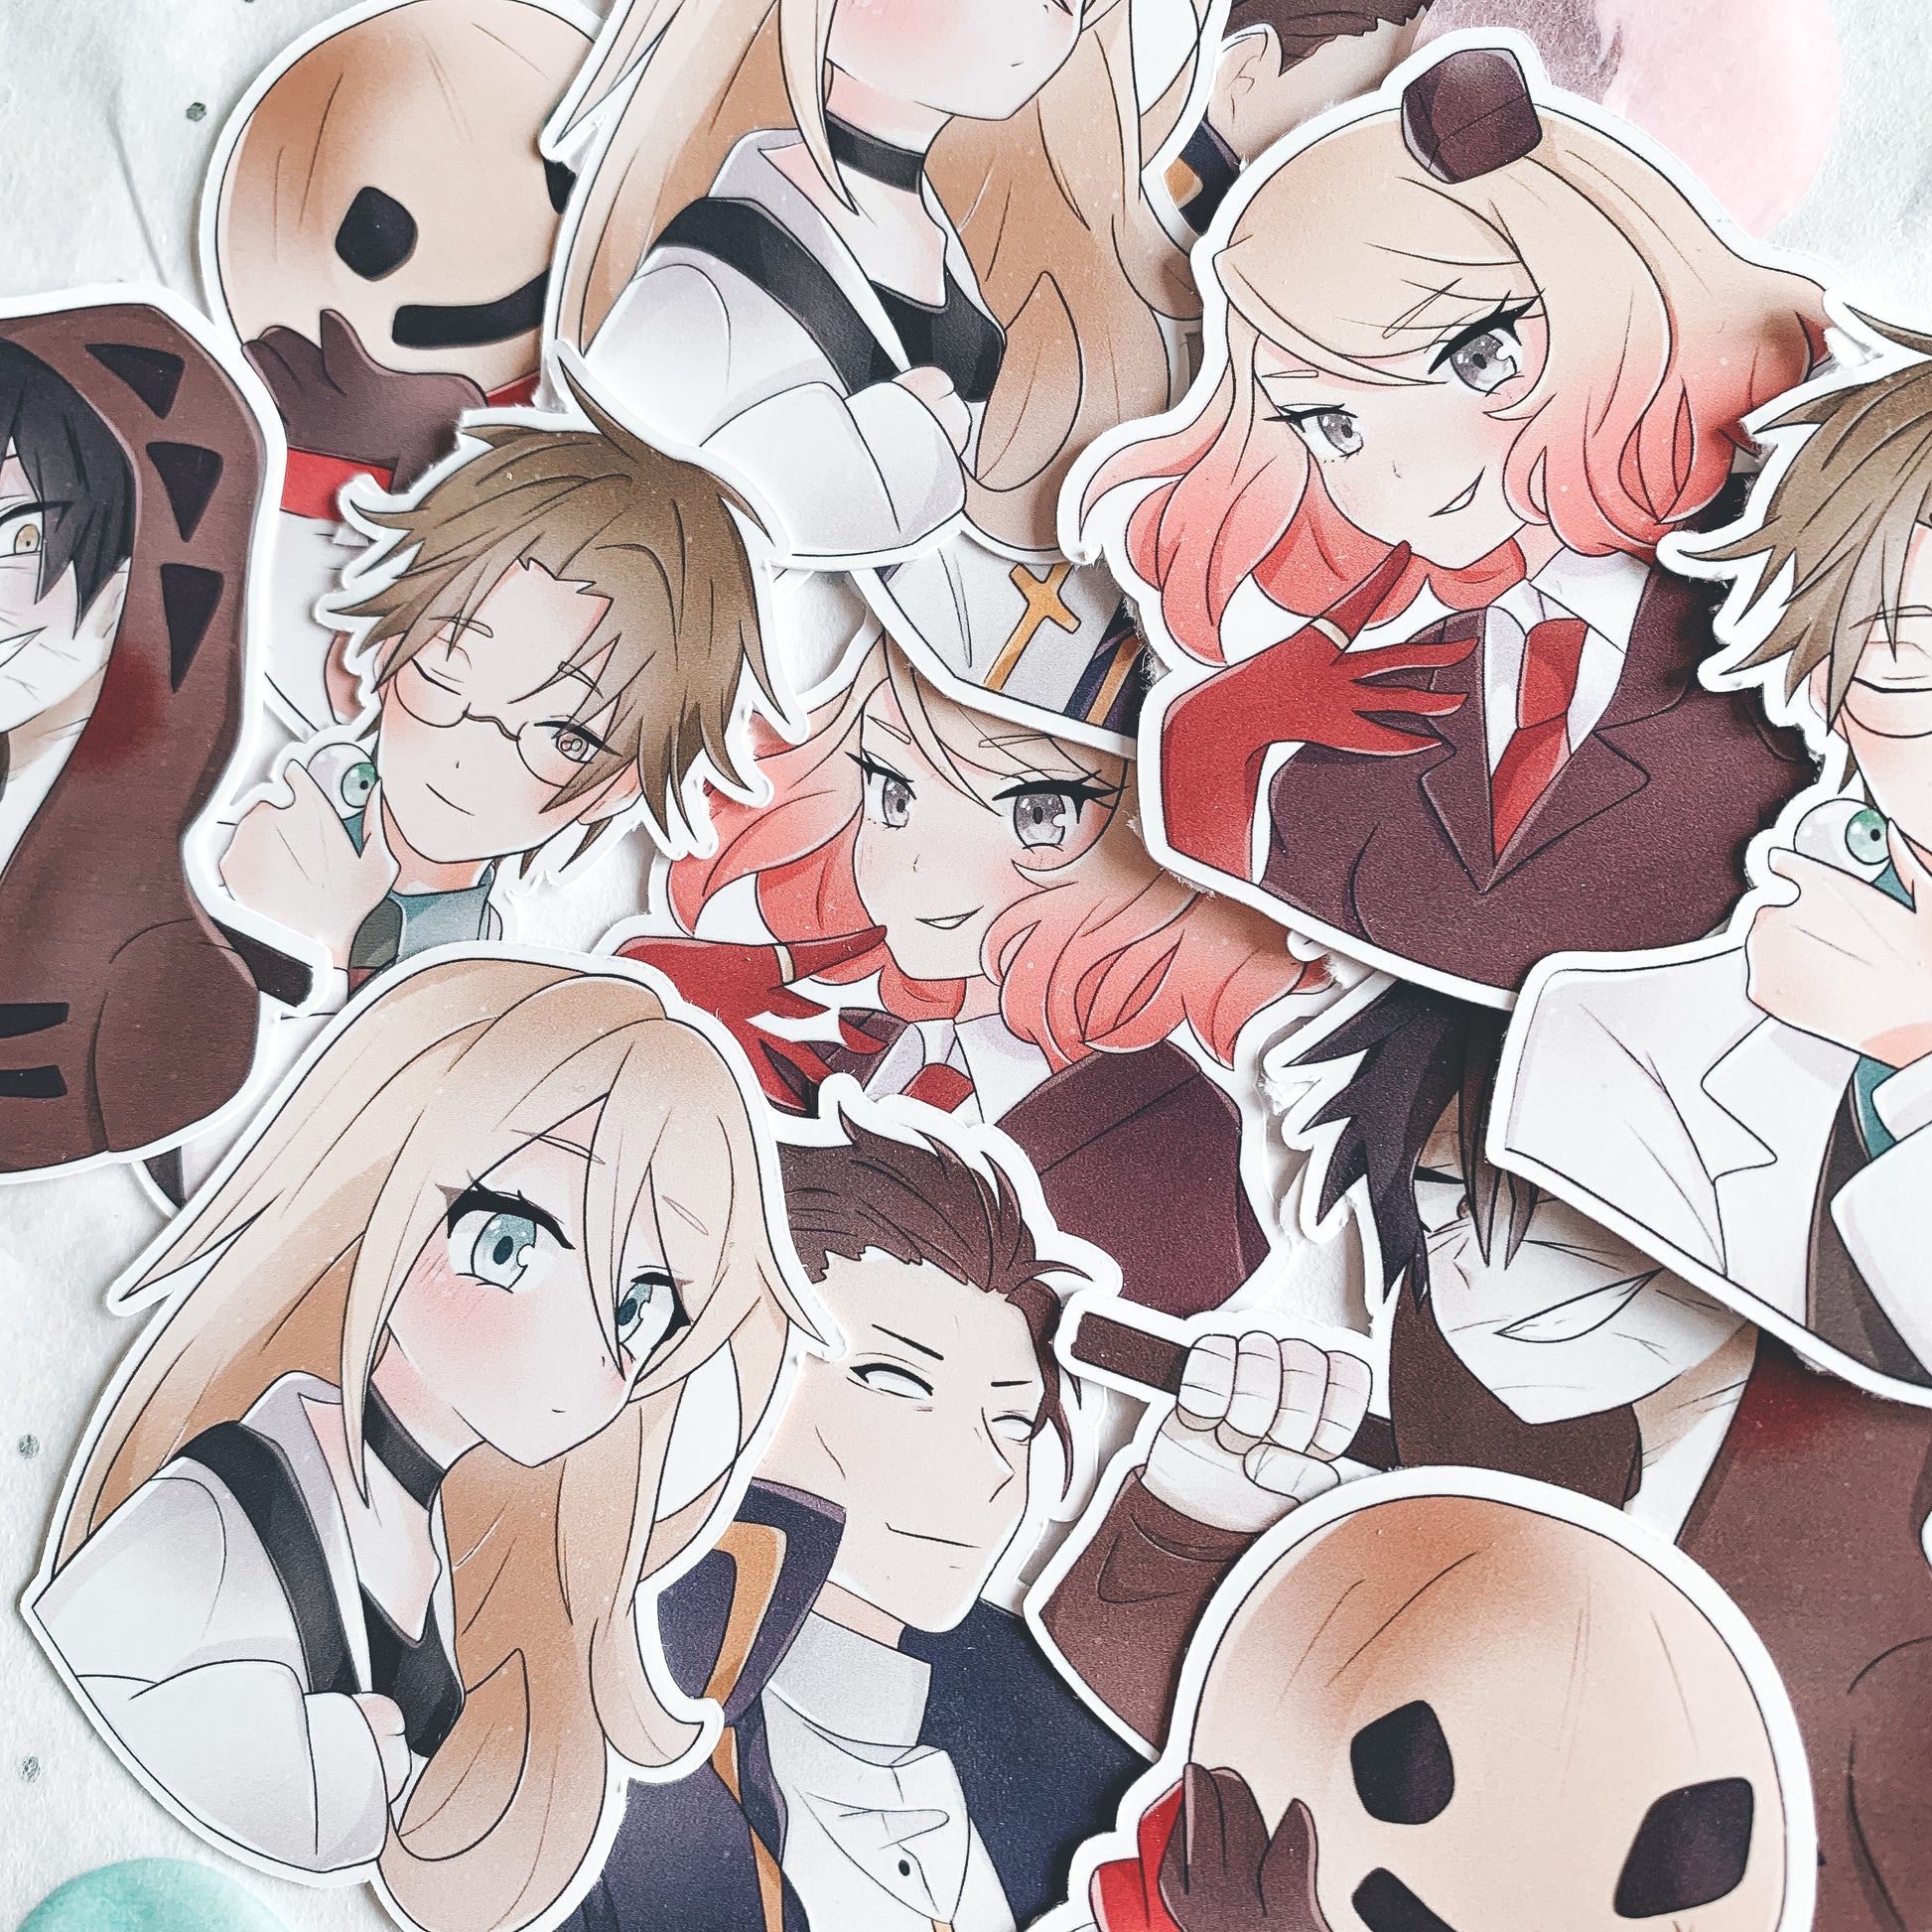 Angels of death - Angels Of Death - Sticker